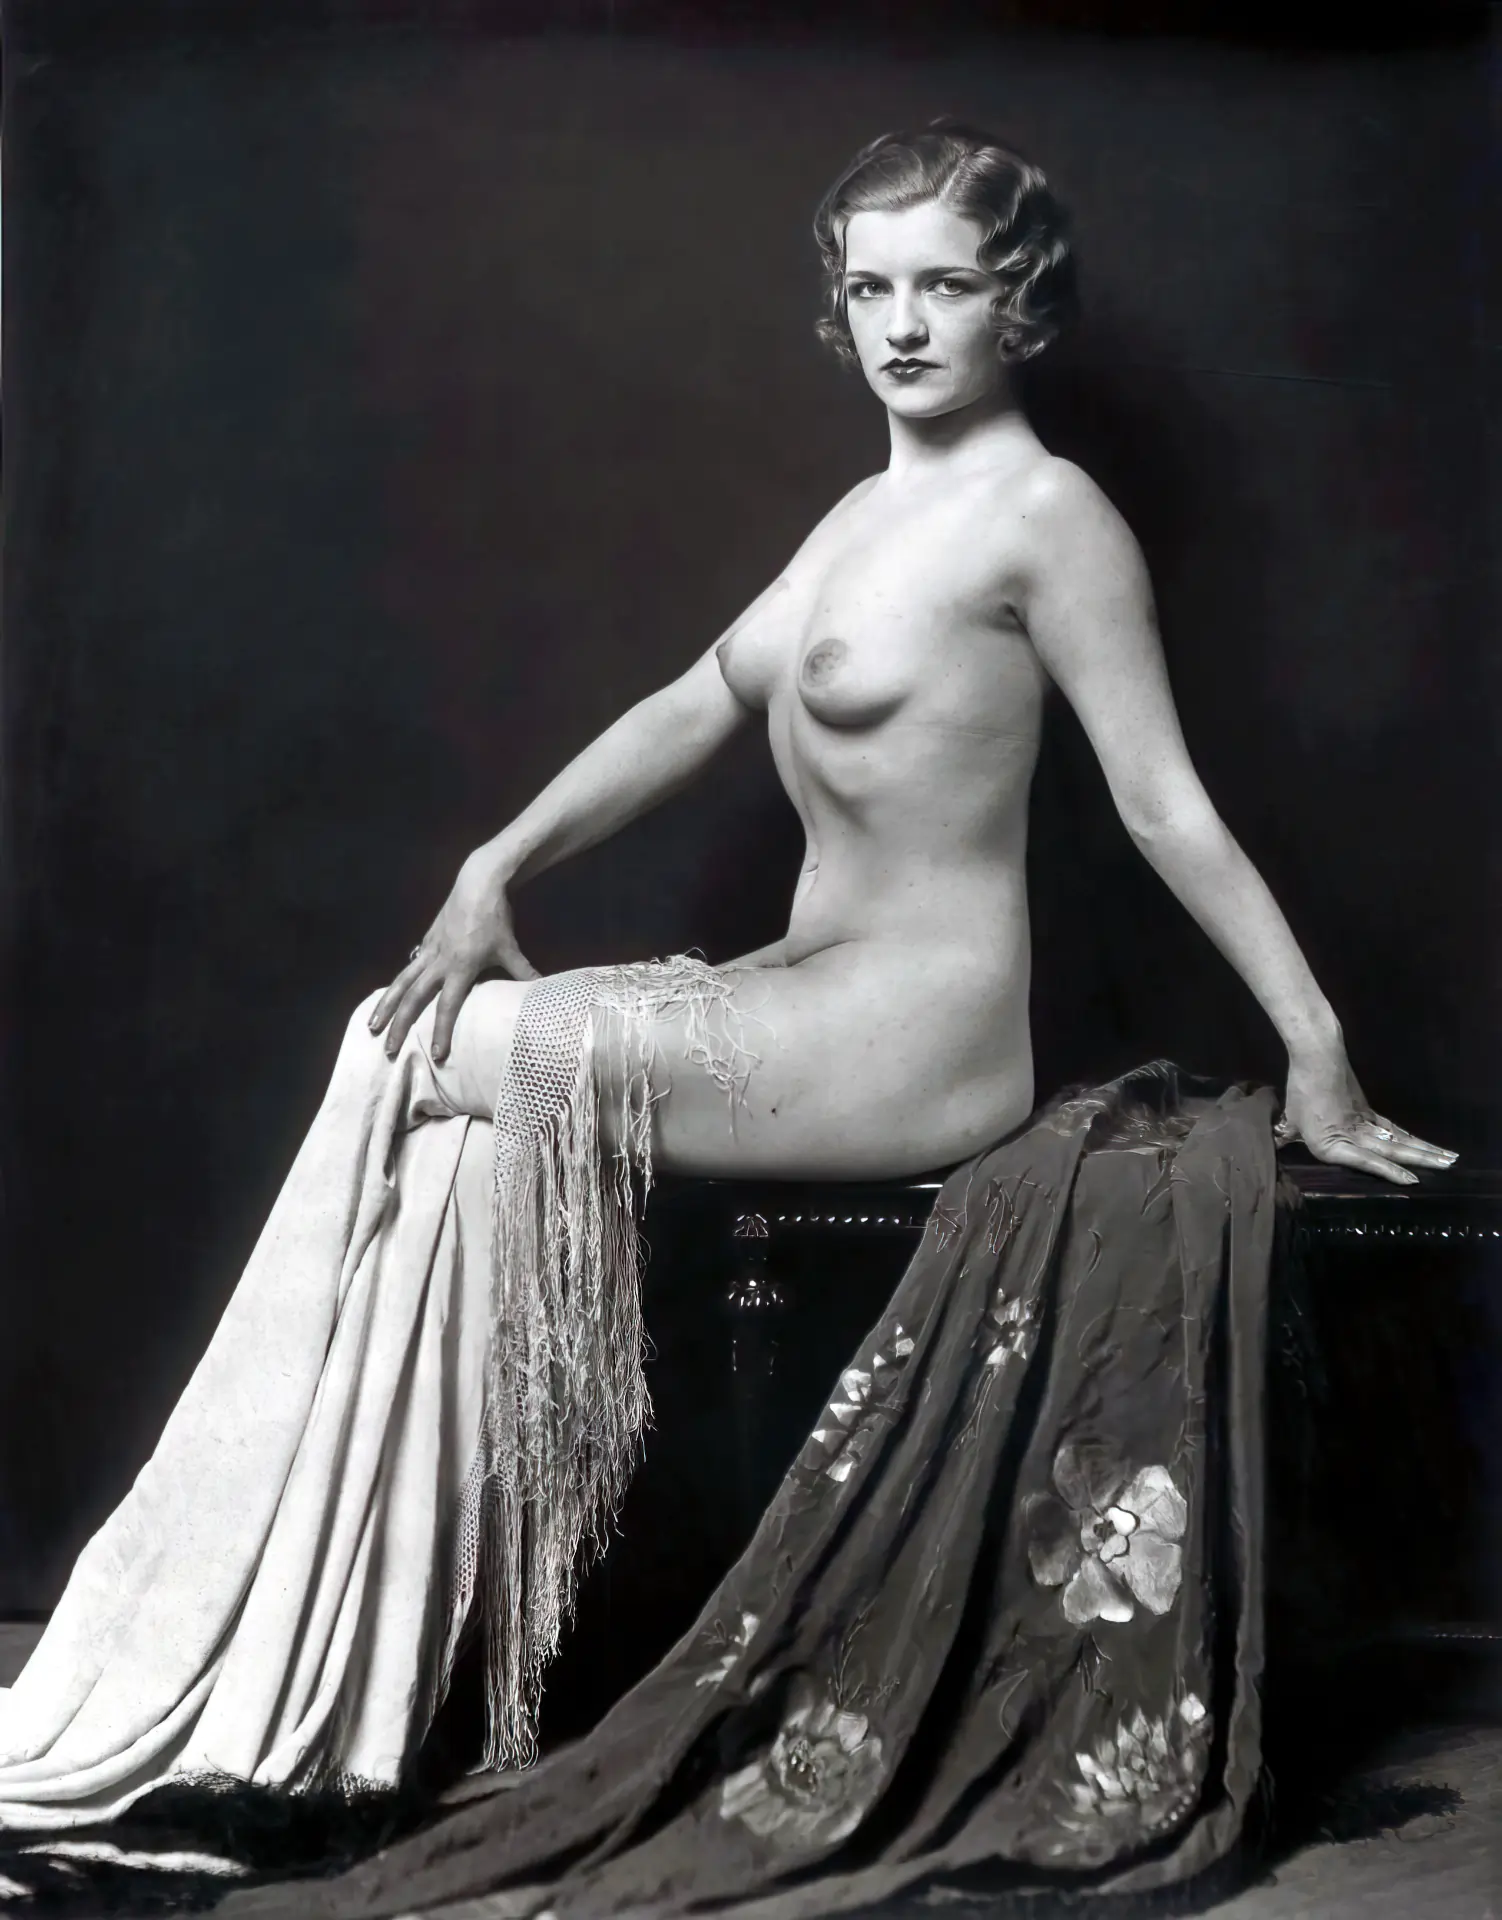 Graceful blonde with a vintage hairstyle poses naked on a chair